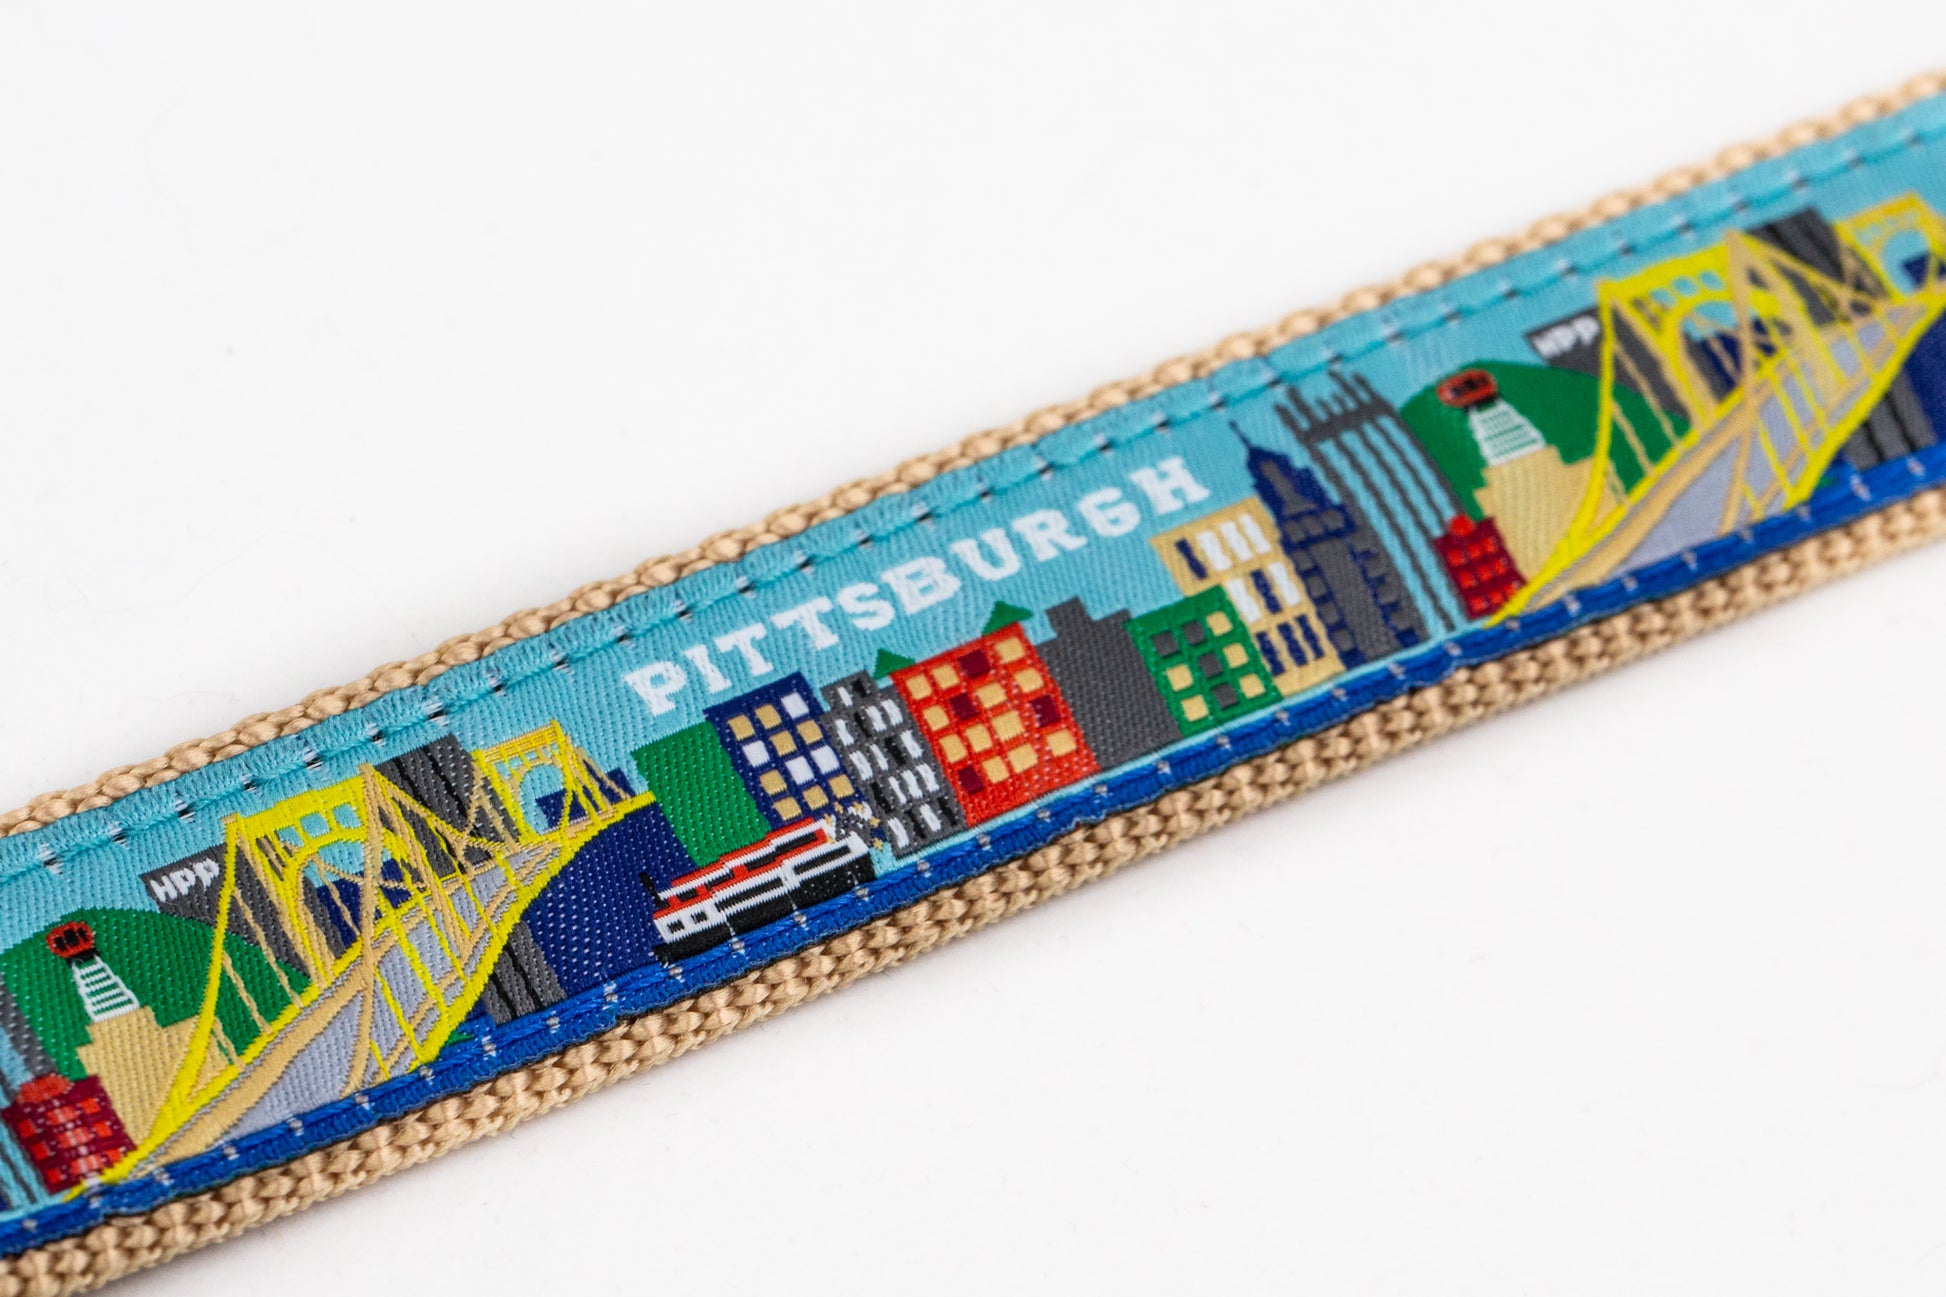 Pittsburgh Skyline Collars and Martingales - Toni Unleashed